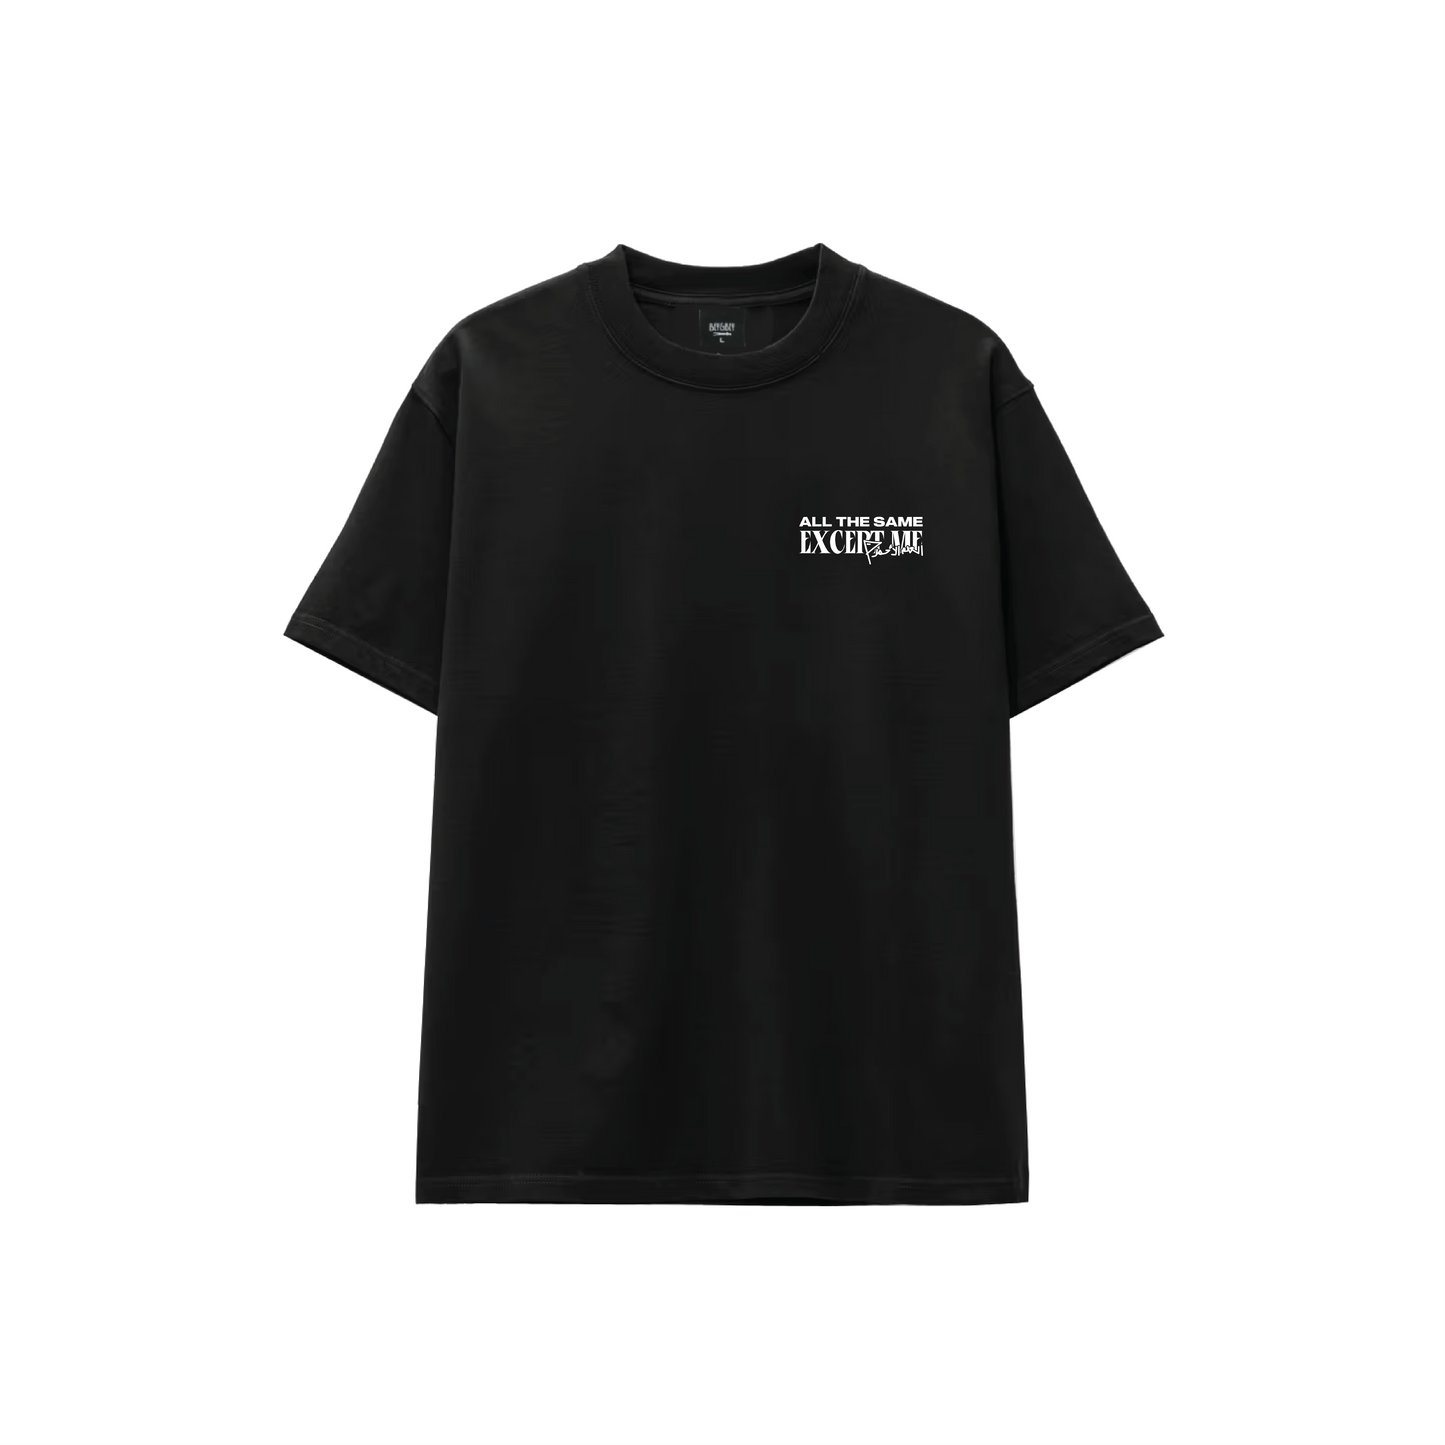 a redflag tee